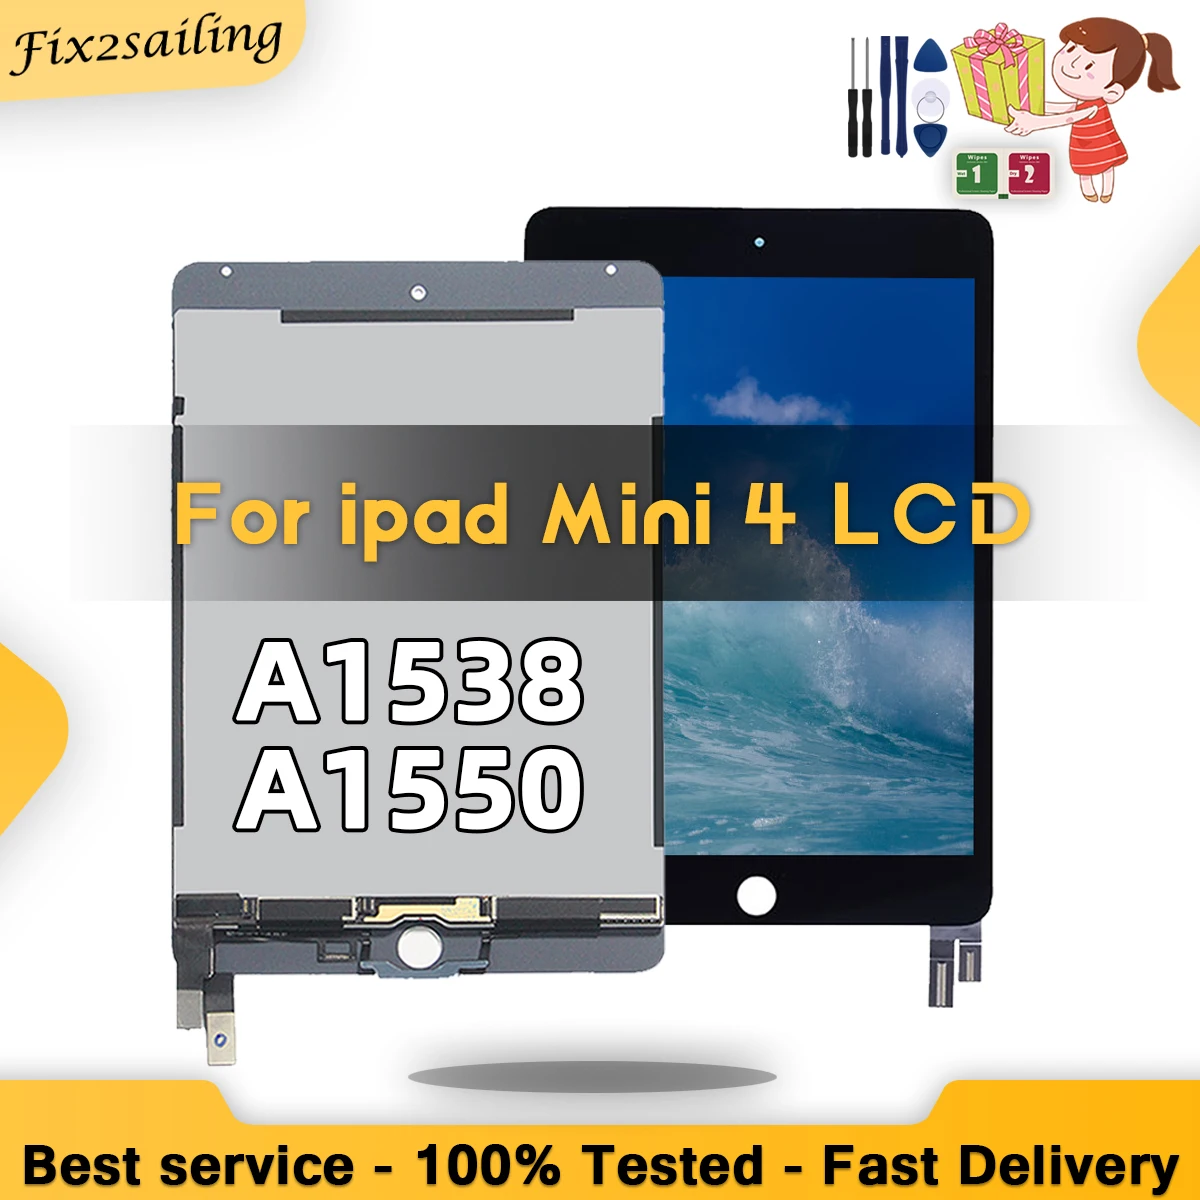 Get a High-Quality Replacement LCD Screen for iPad Air